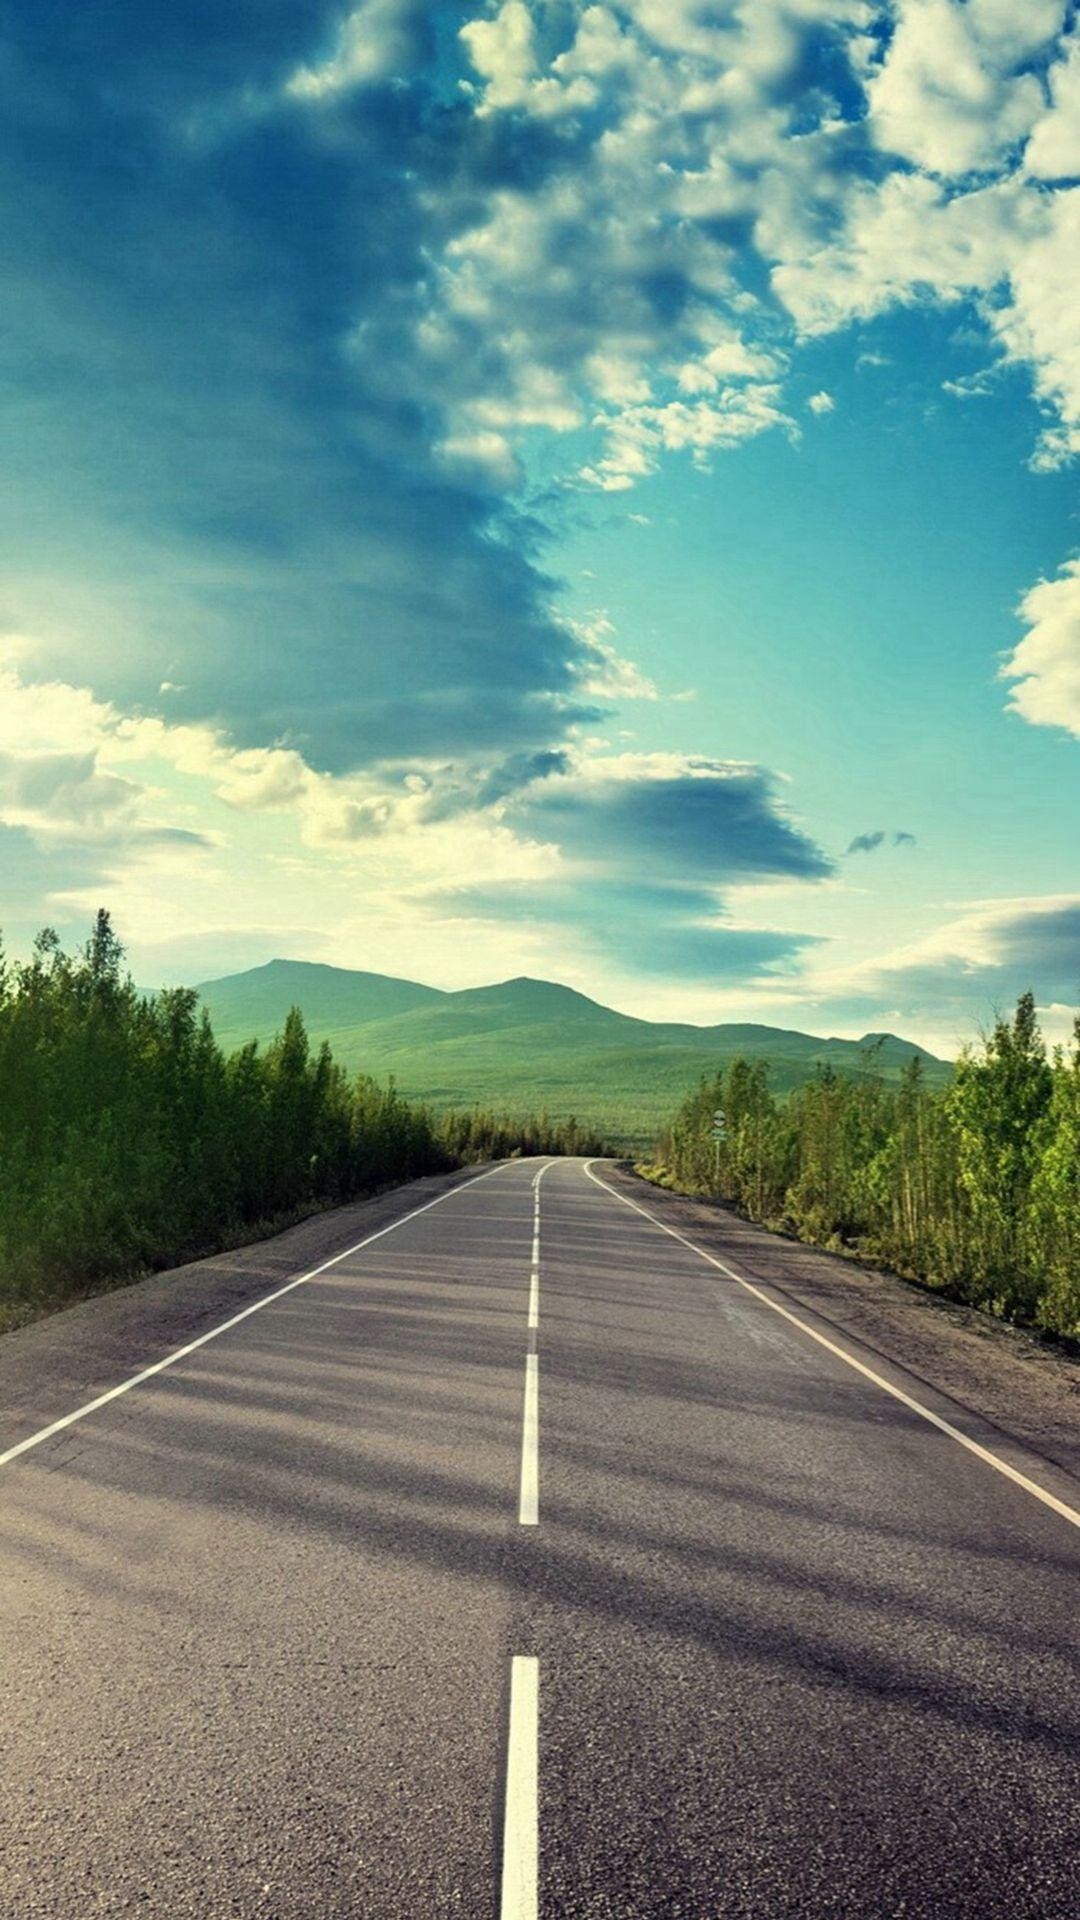 Road iphone wallpaper high quality